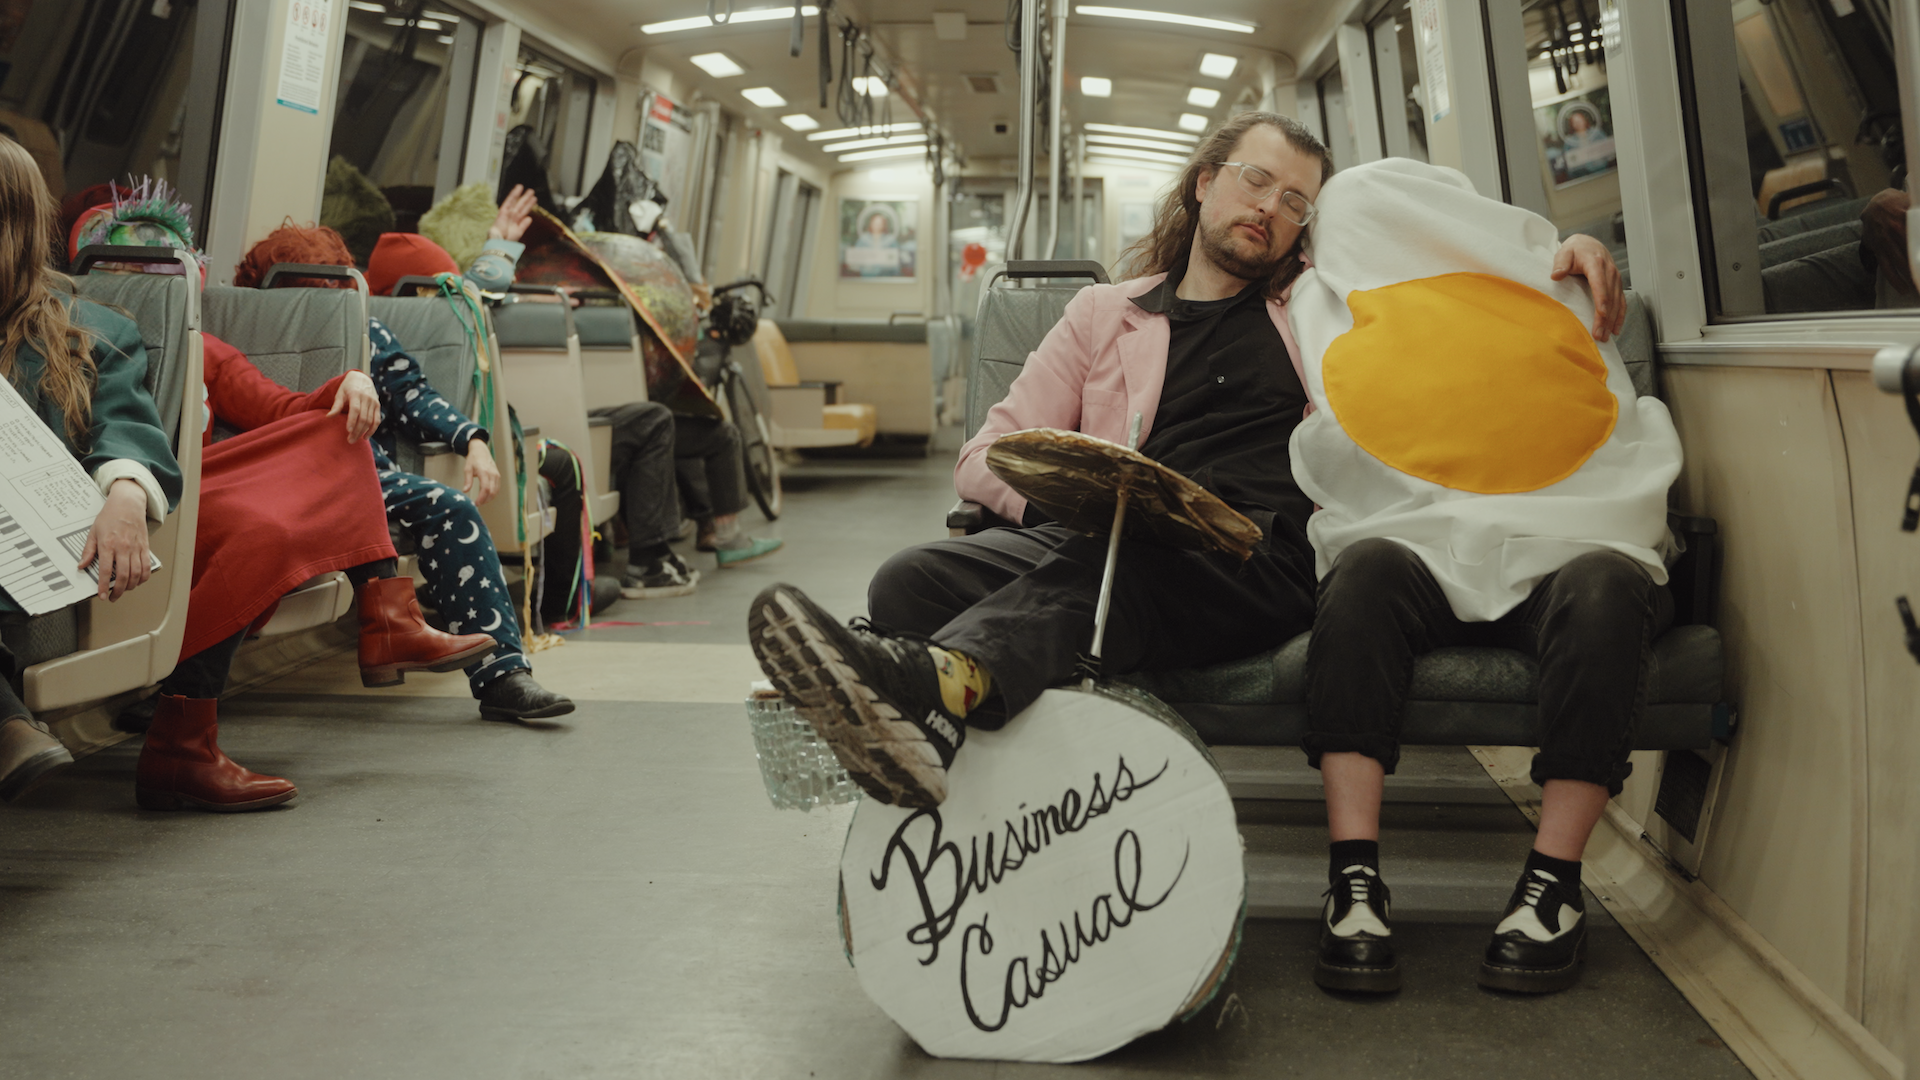 Photo of a person holding another person in an egg costume as they sit on the BART train